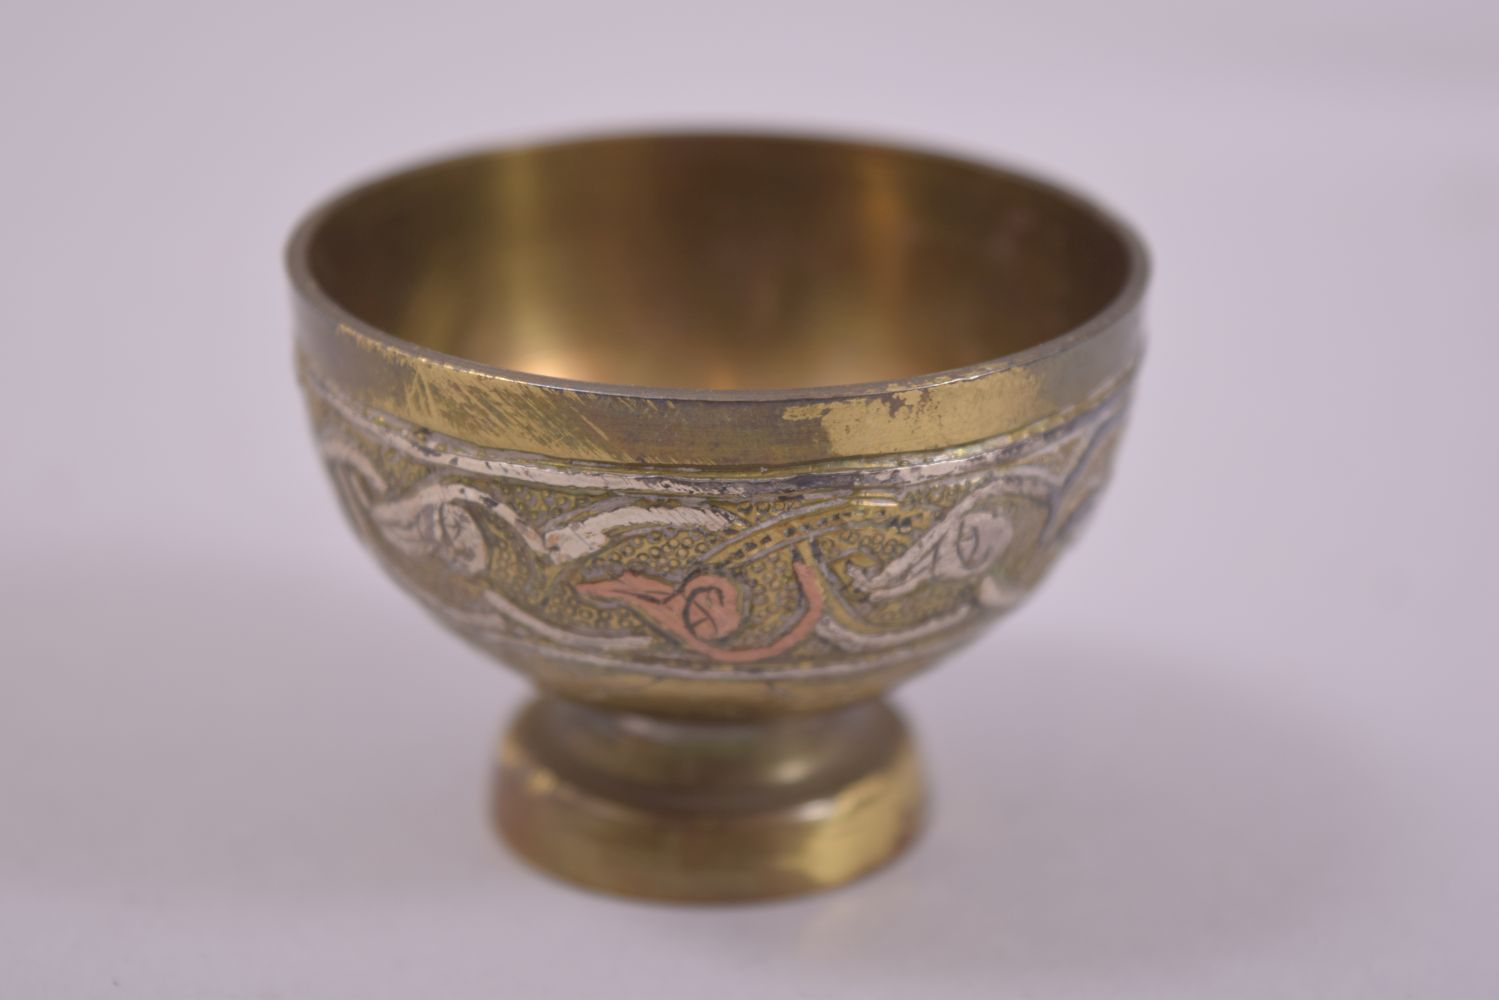 FIVE 19TH CENTURY SYRIAN SILVER AND COPPER OVERLAID PEDESTAL CUPS, diameter 5.5cm. - Image 6 of 8